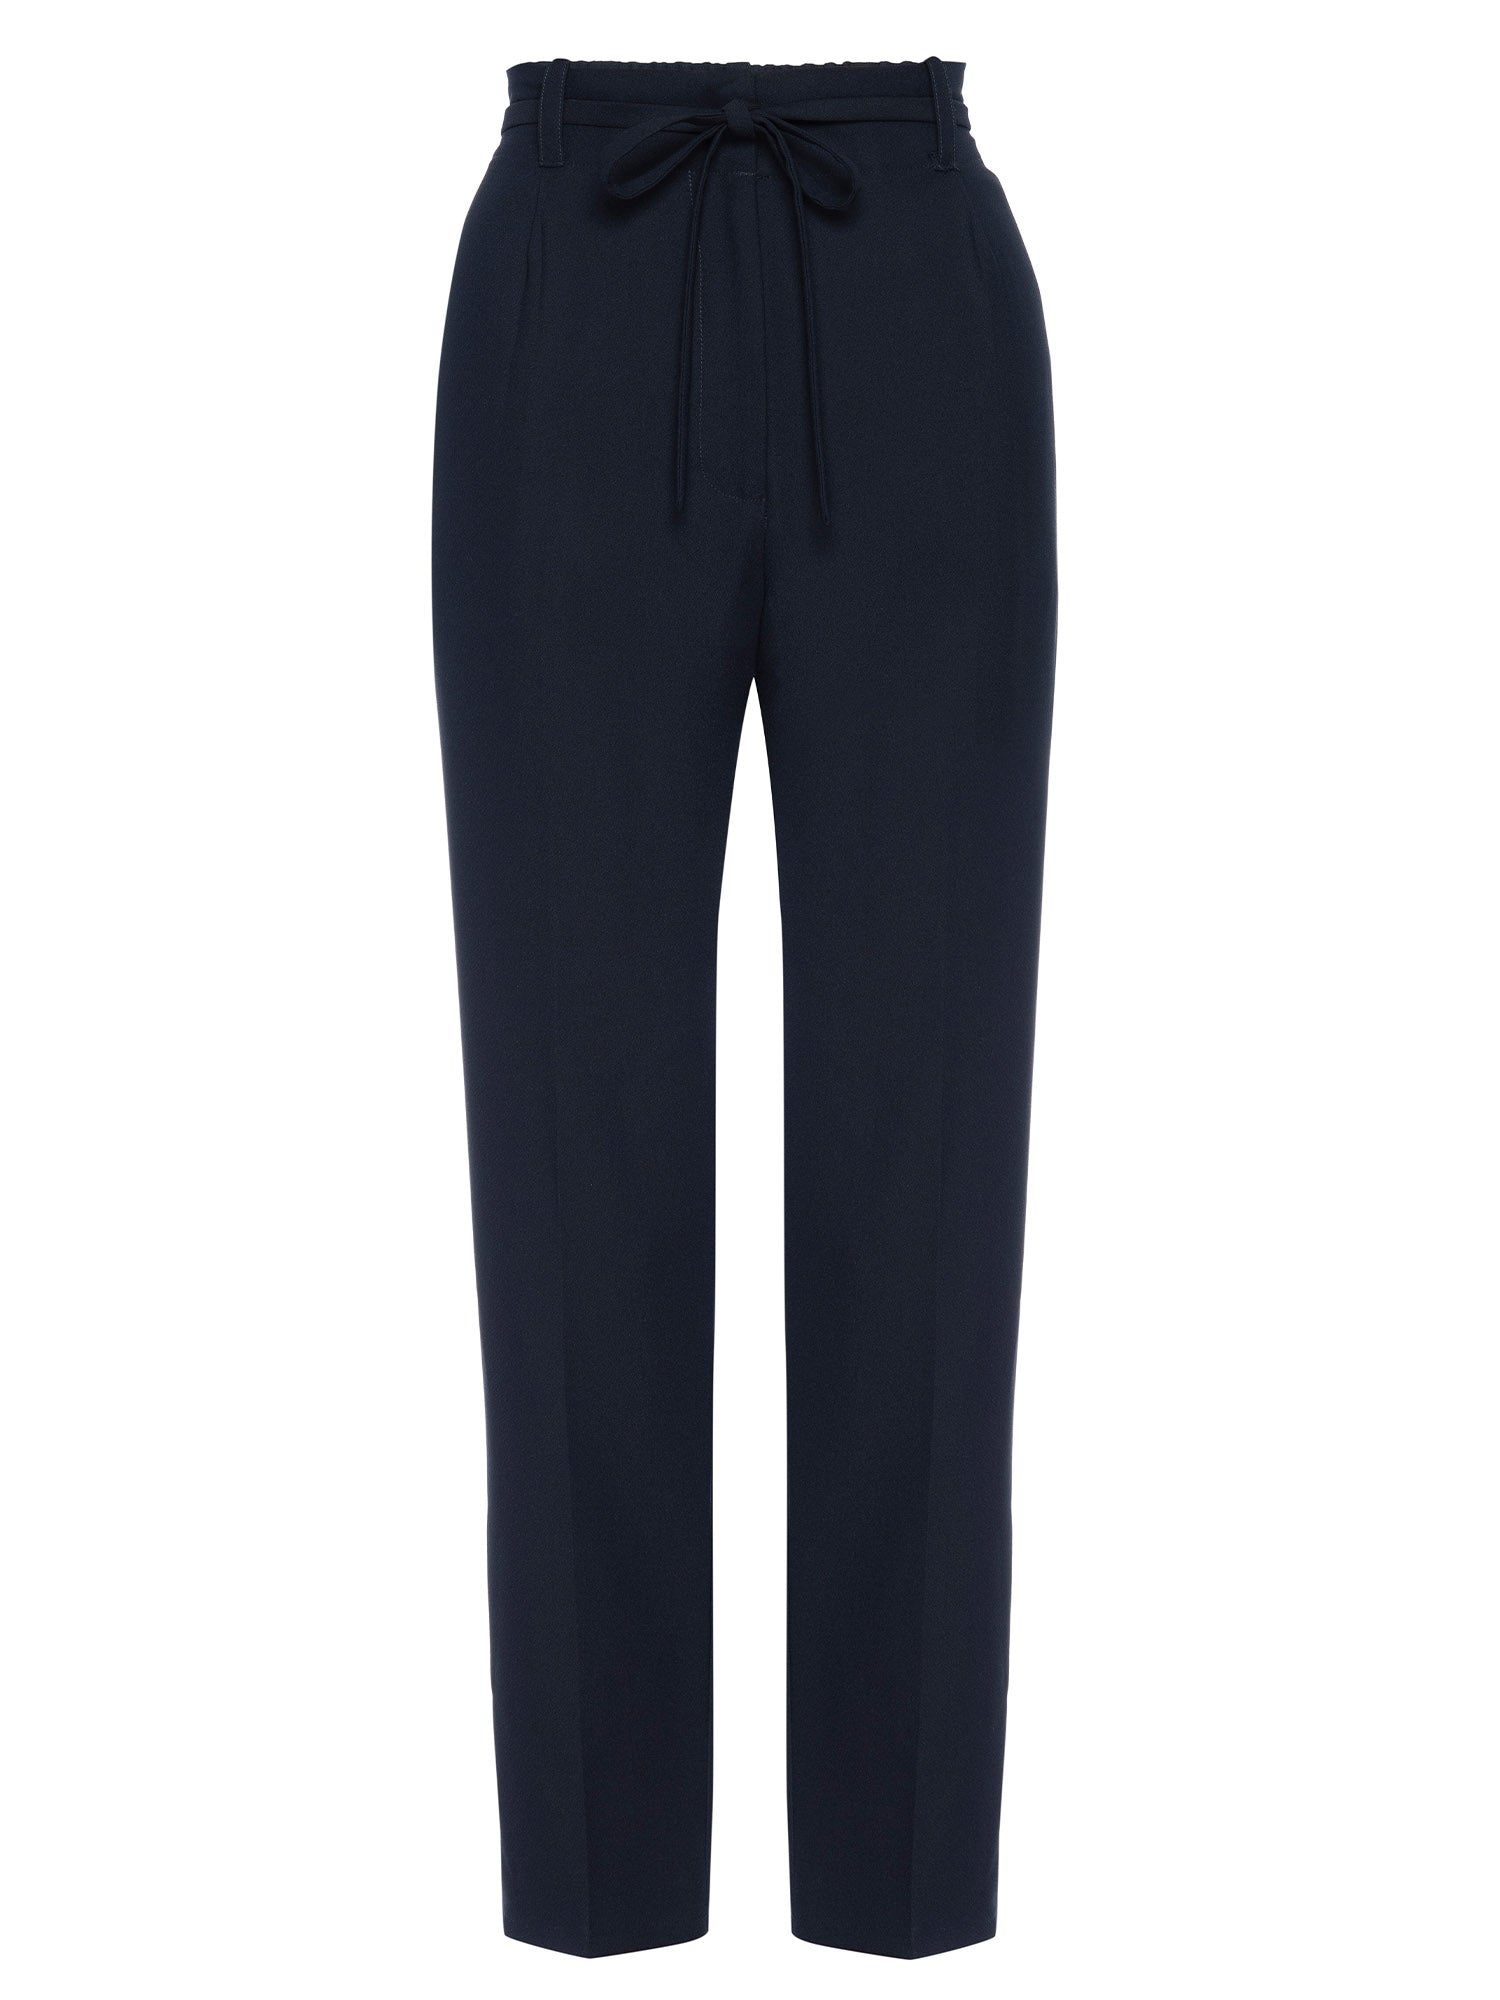 Dion navy front pleat ankle length pant flat view